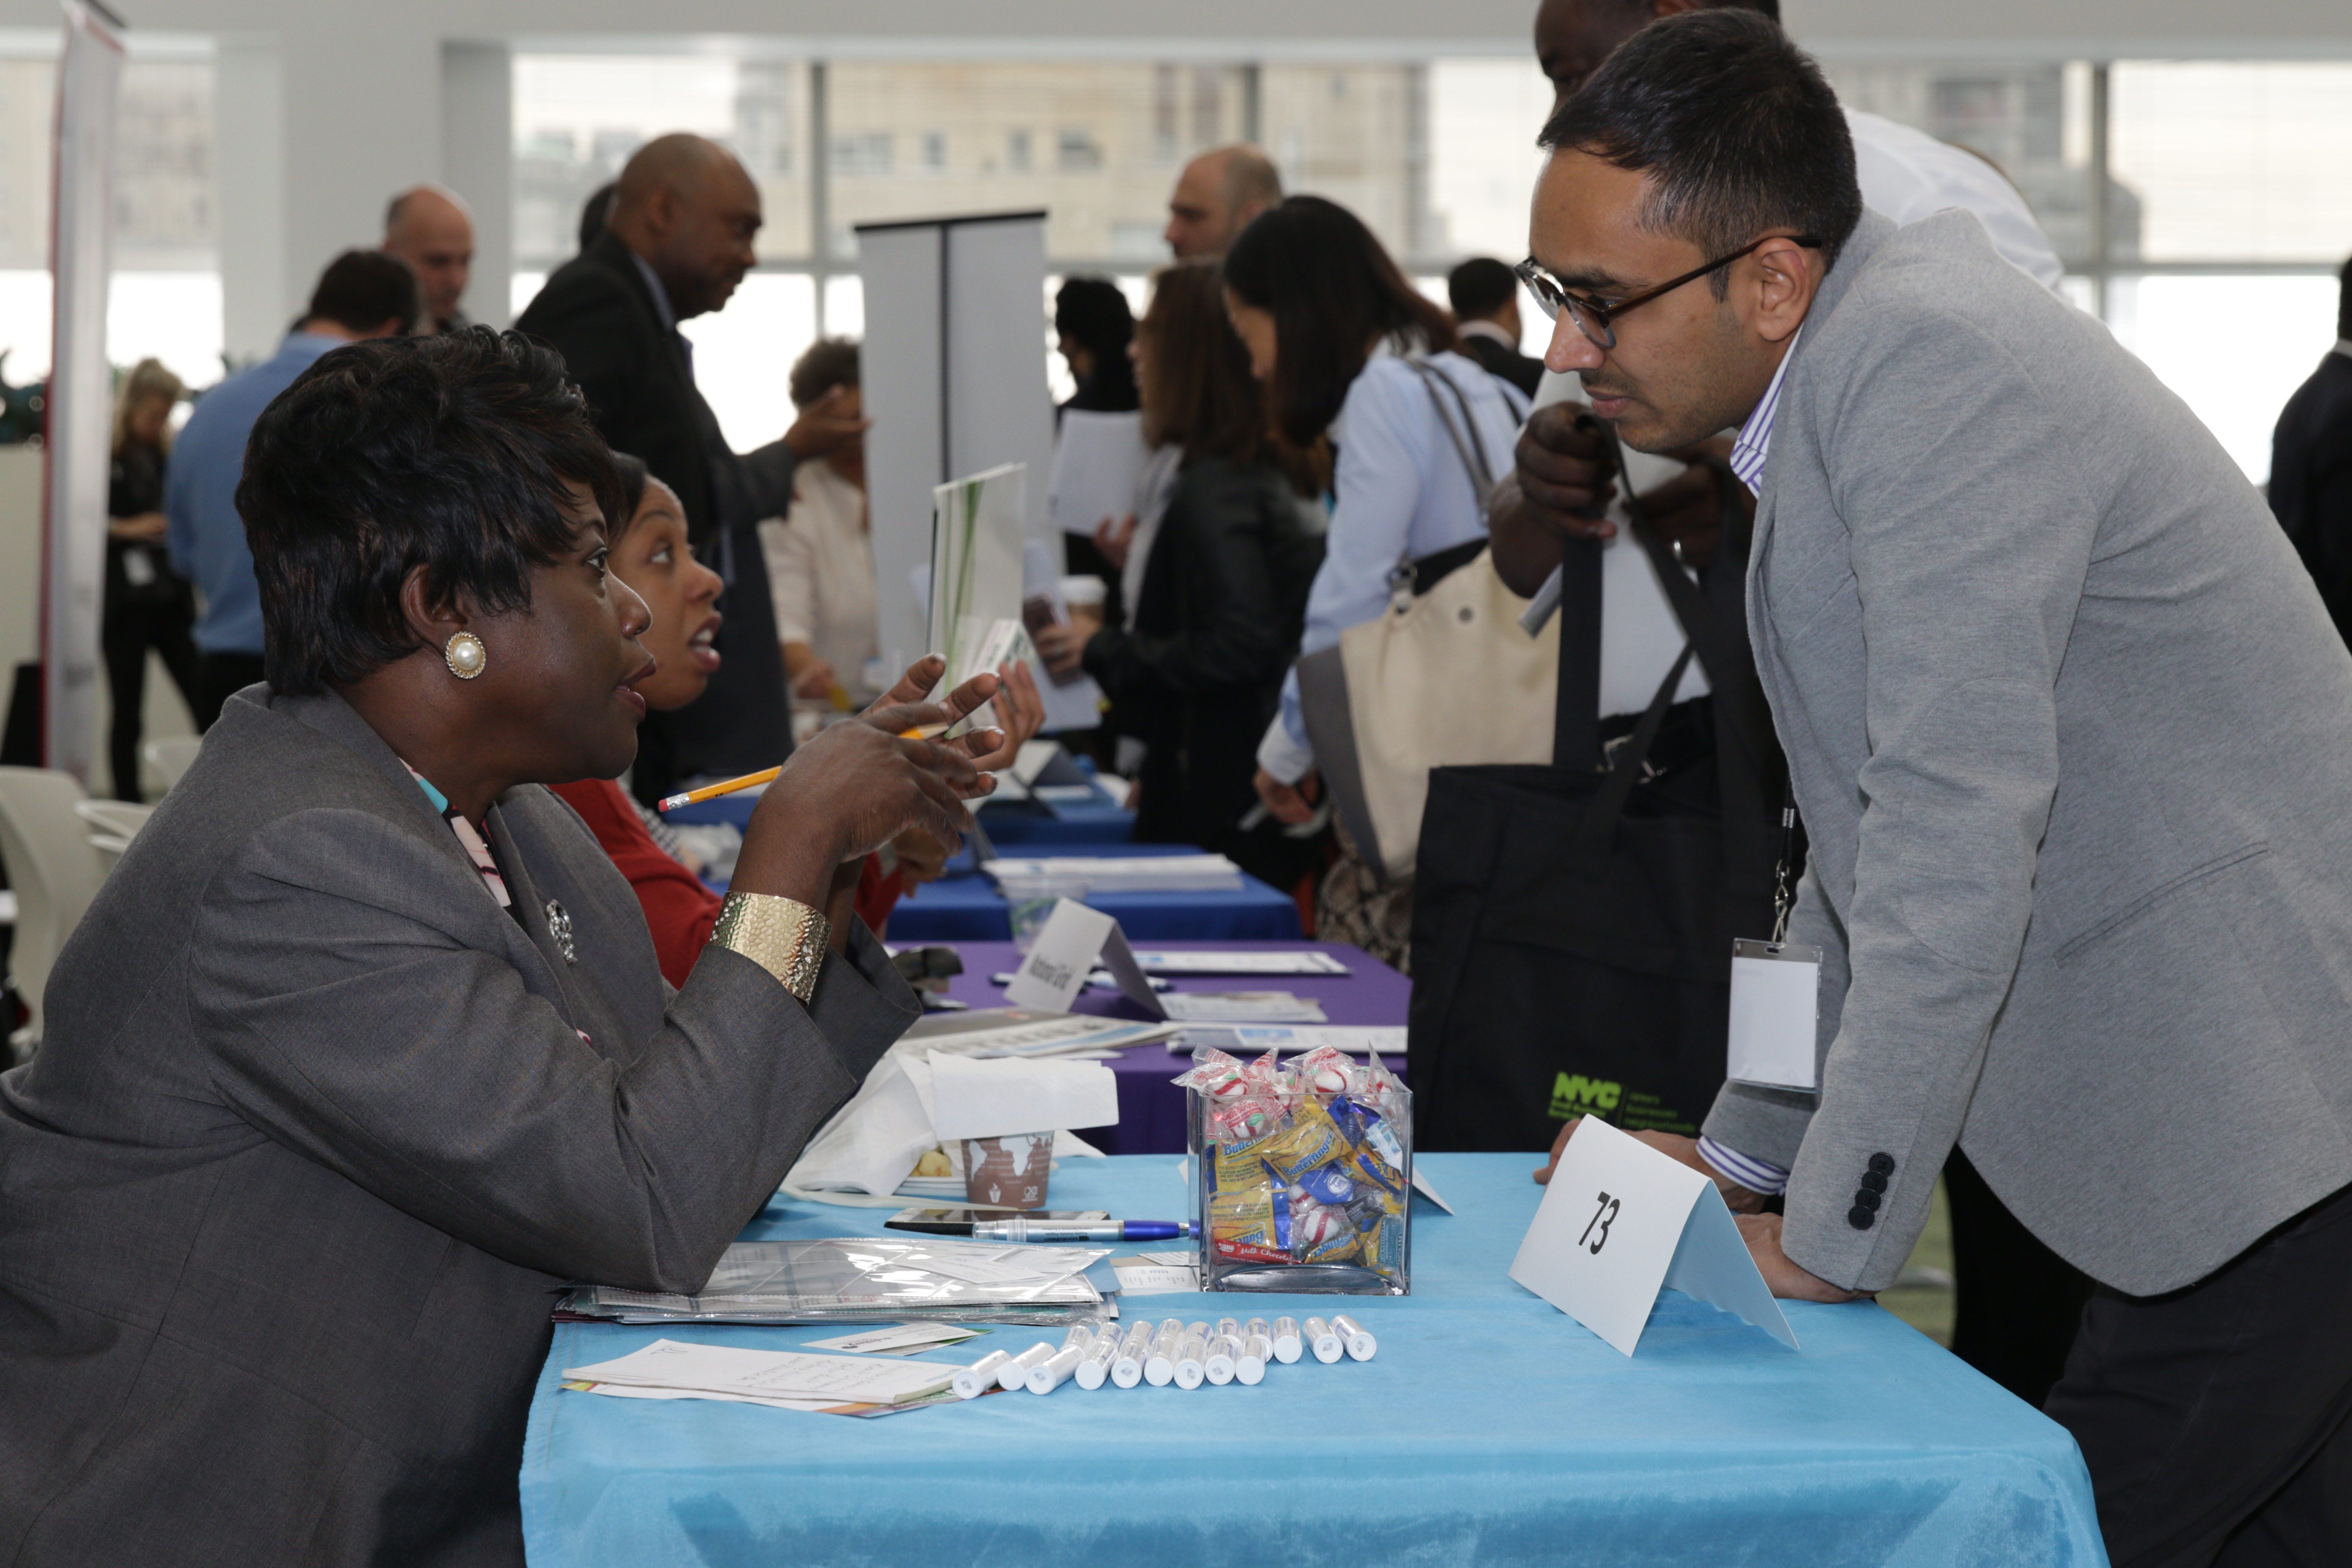 A City representative is assisting a business owner at the annual Citywide Procurement Fair